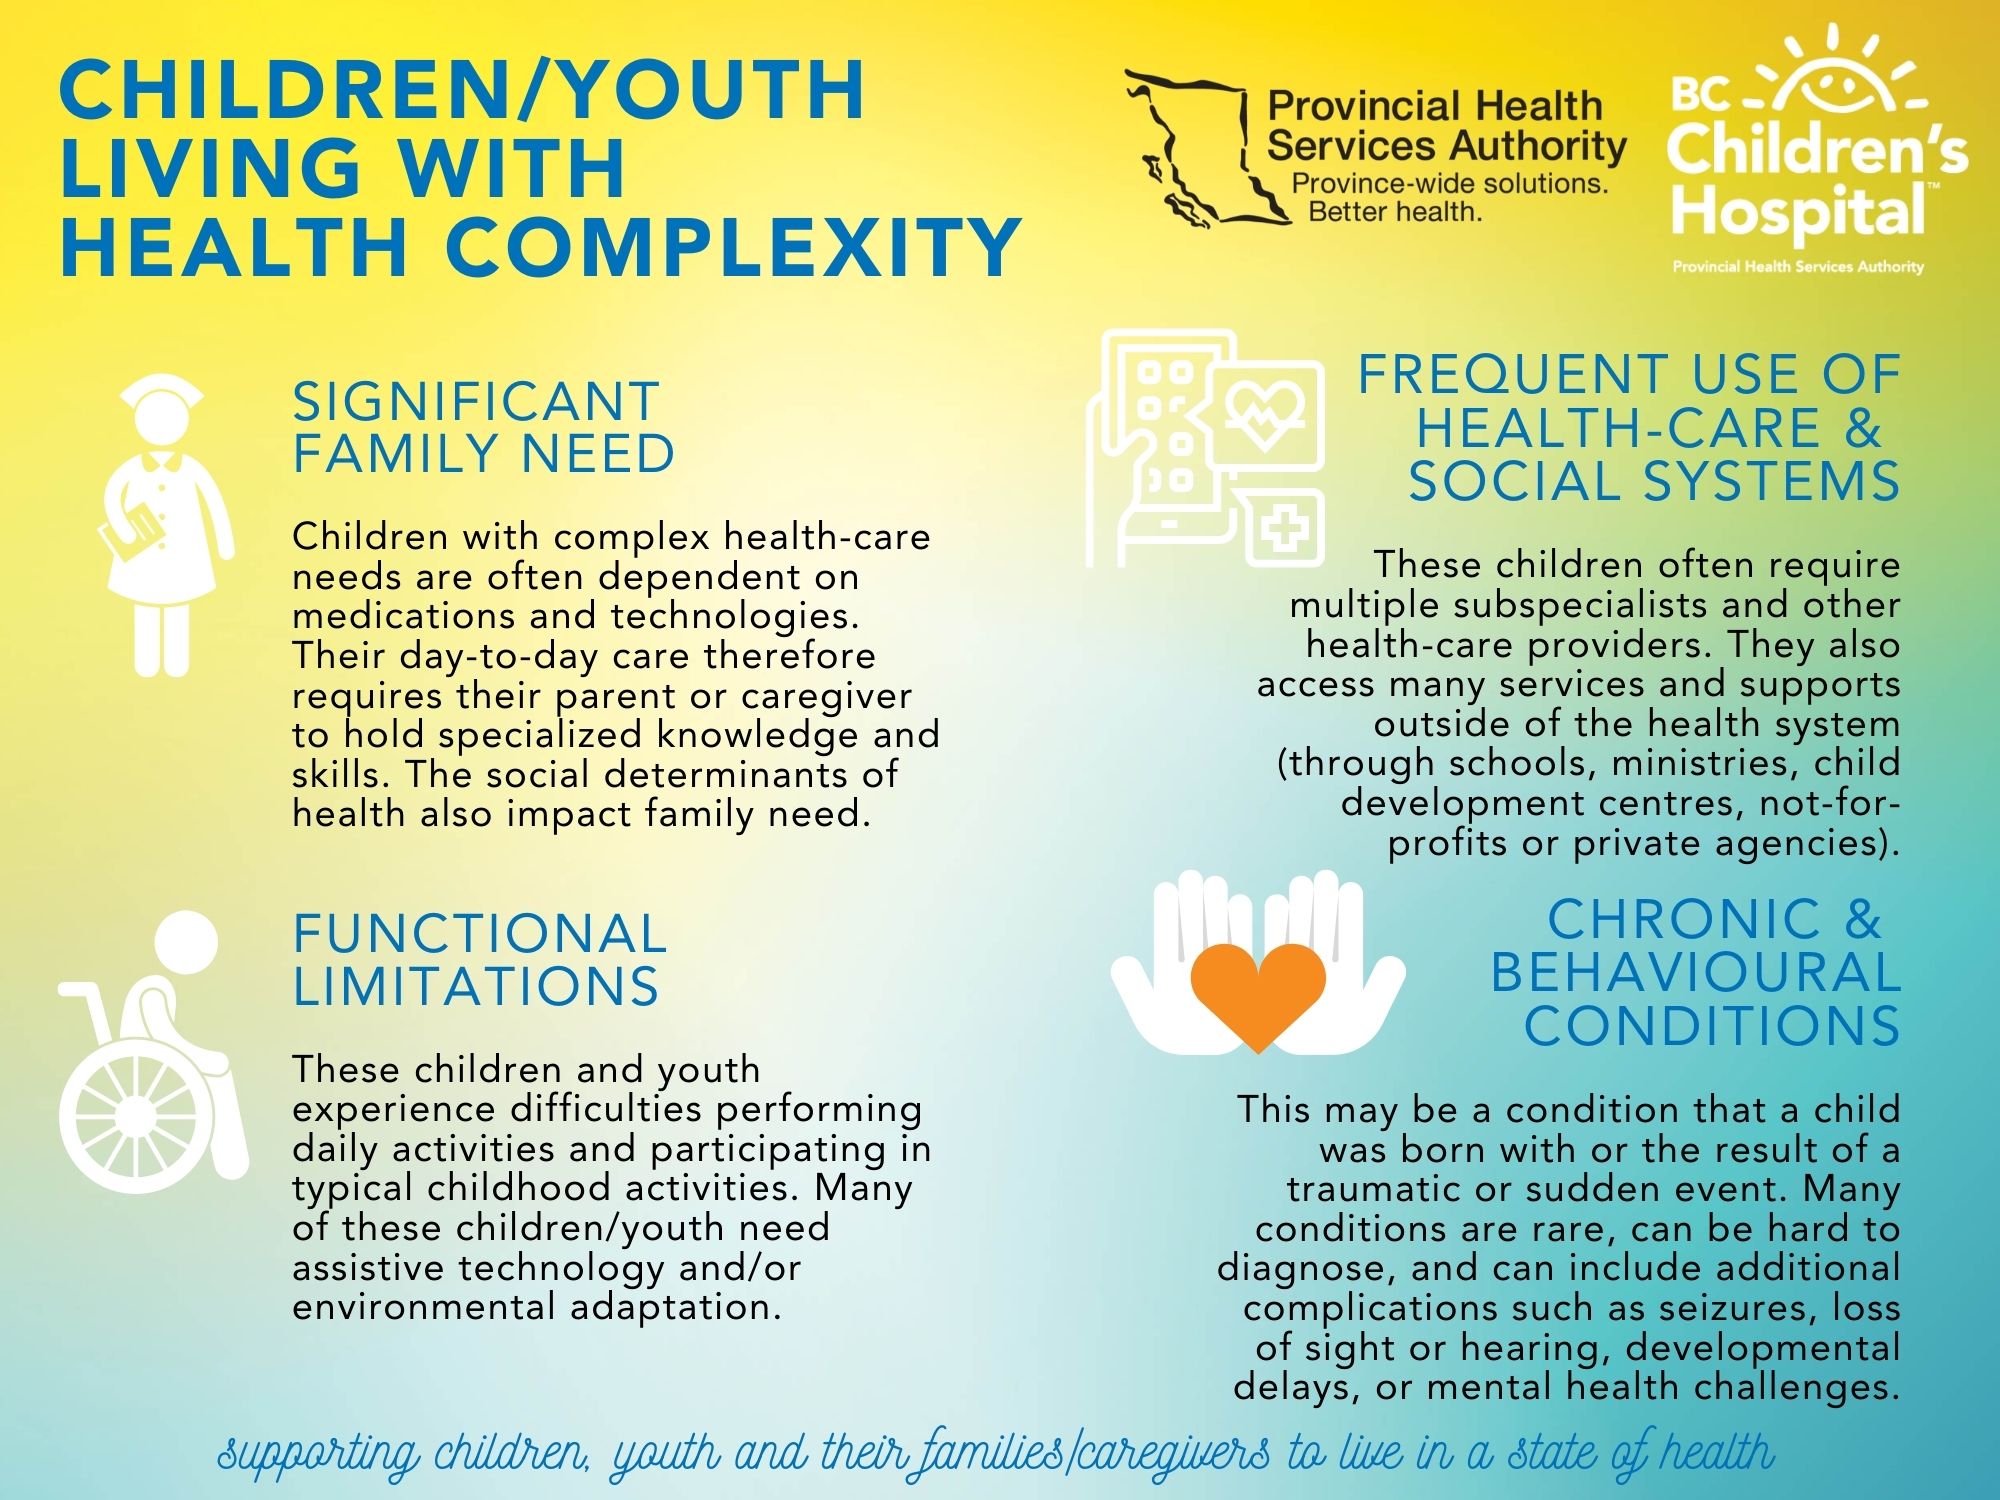 2021-06-28 ChildrenyYouthLivingWithHealthComplexity.jpg